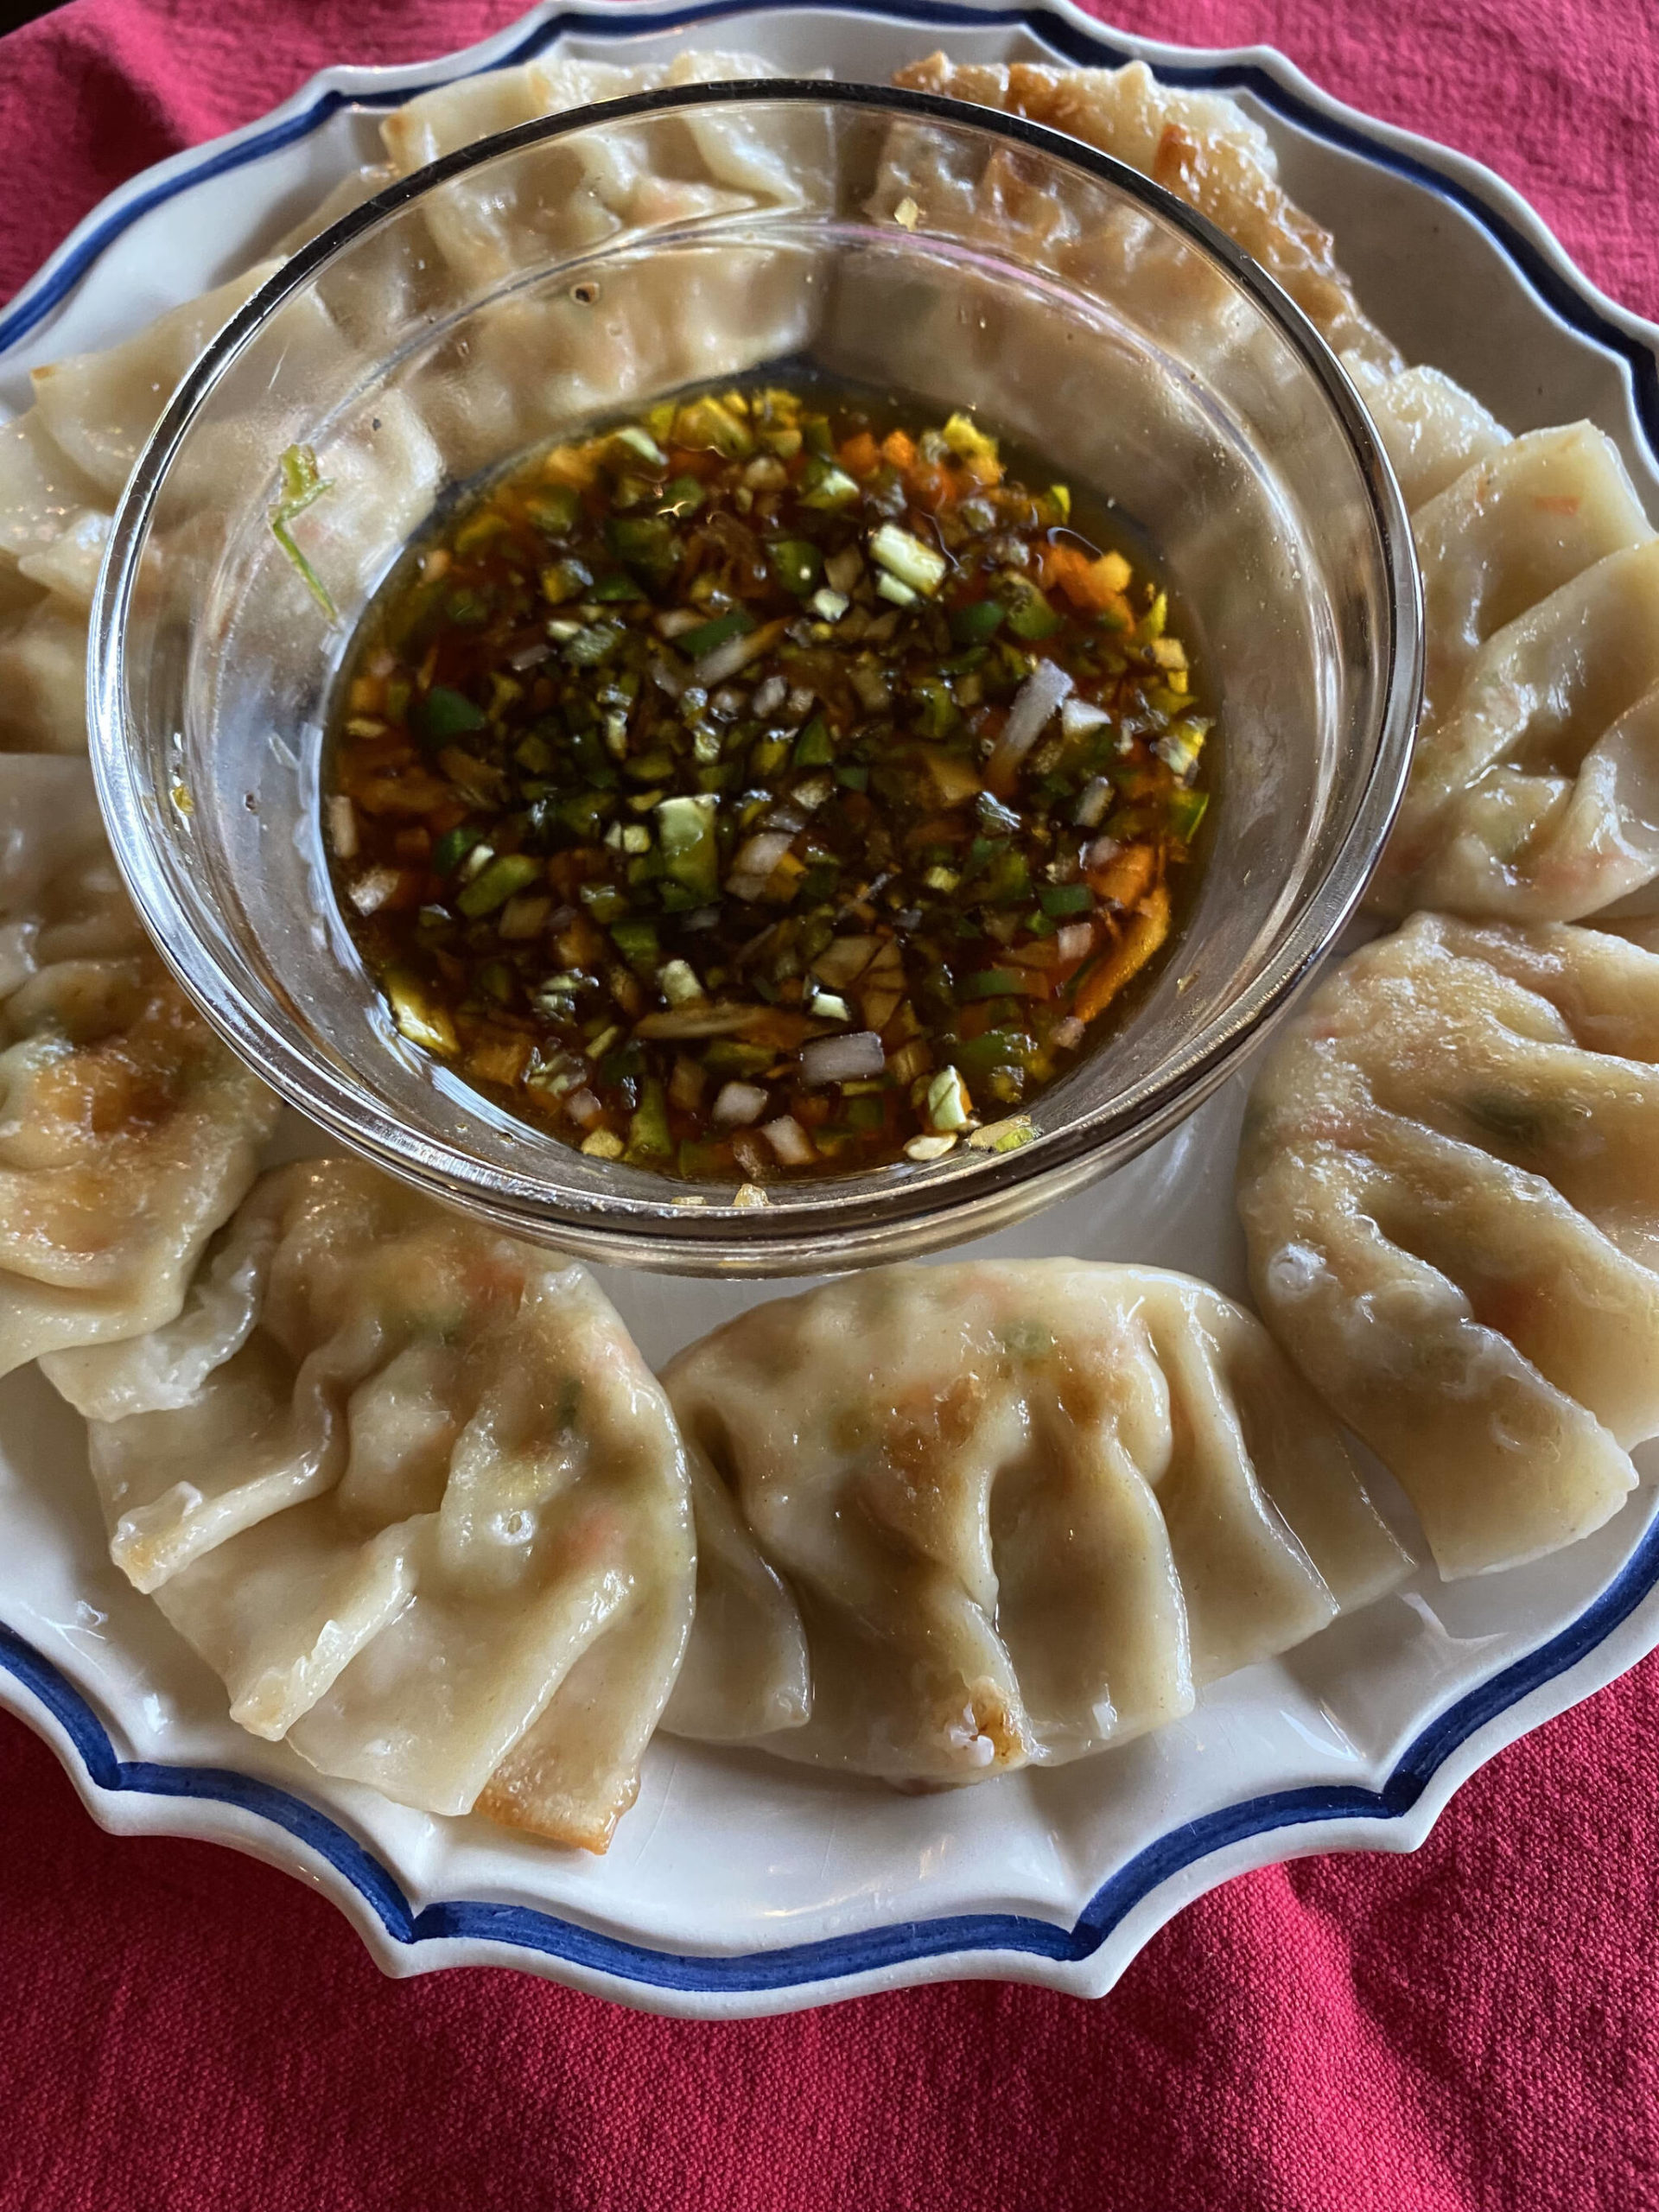 Cooked by a combination of pan frying and steaming, delicate tofu and vegetable dumplings require a delicate hand and patience. (Photo by Tressa Dale/Peninsula Clarion)